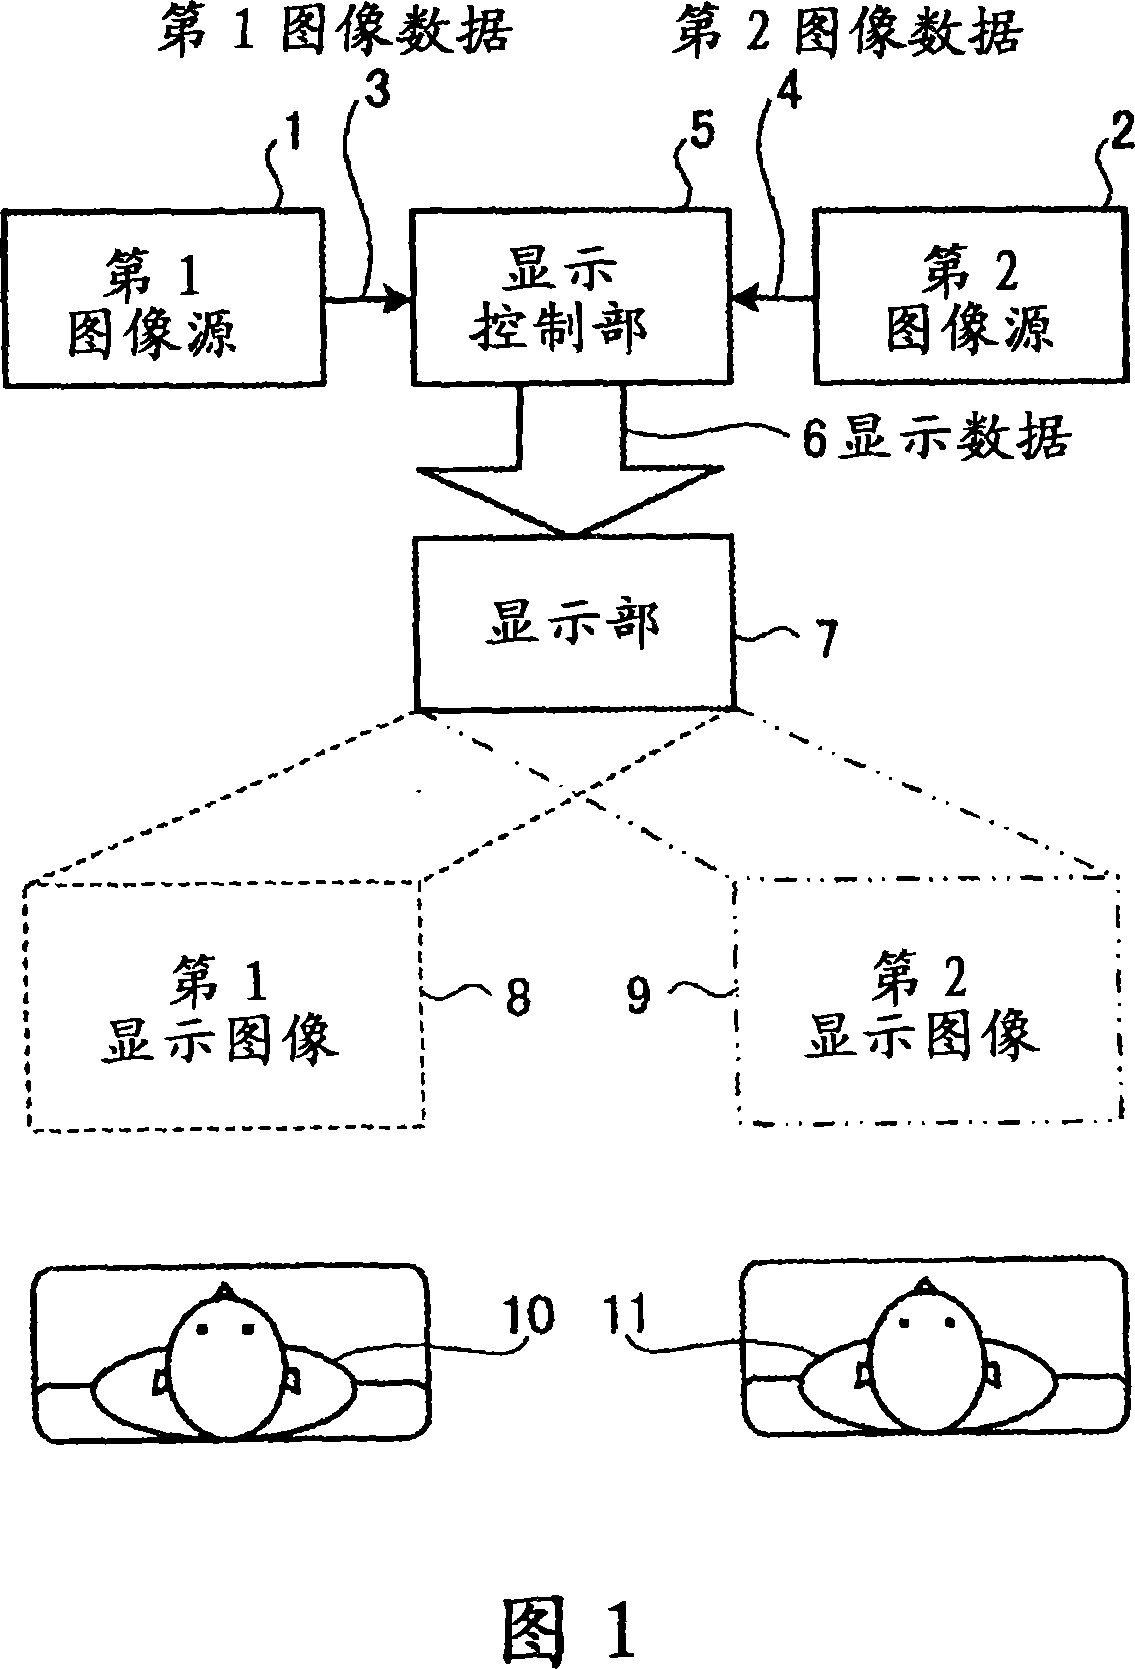 Display controller and display device